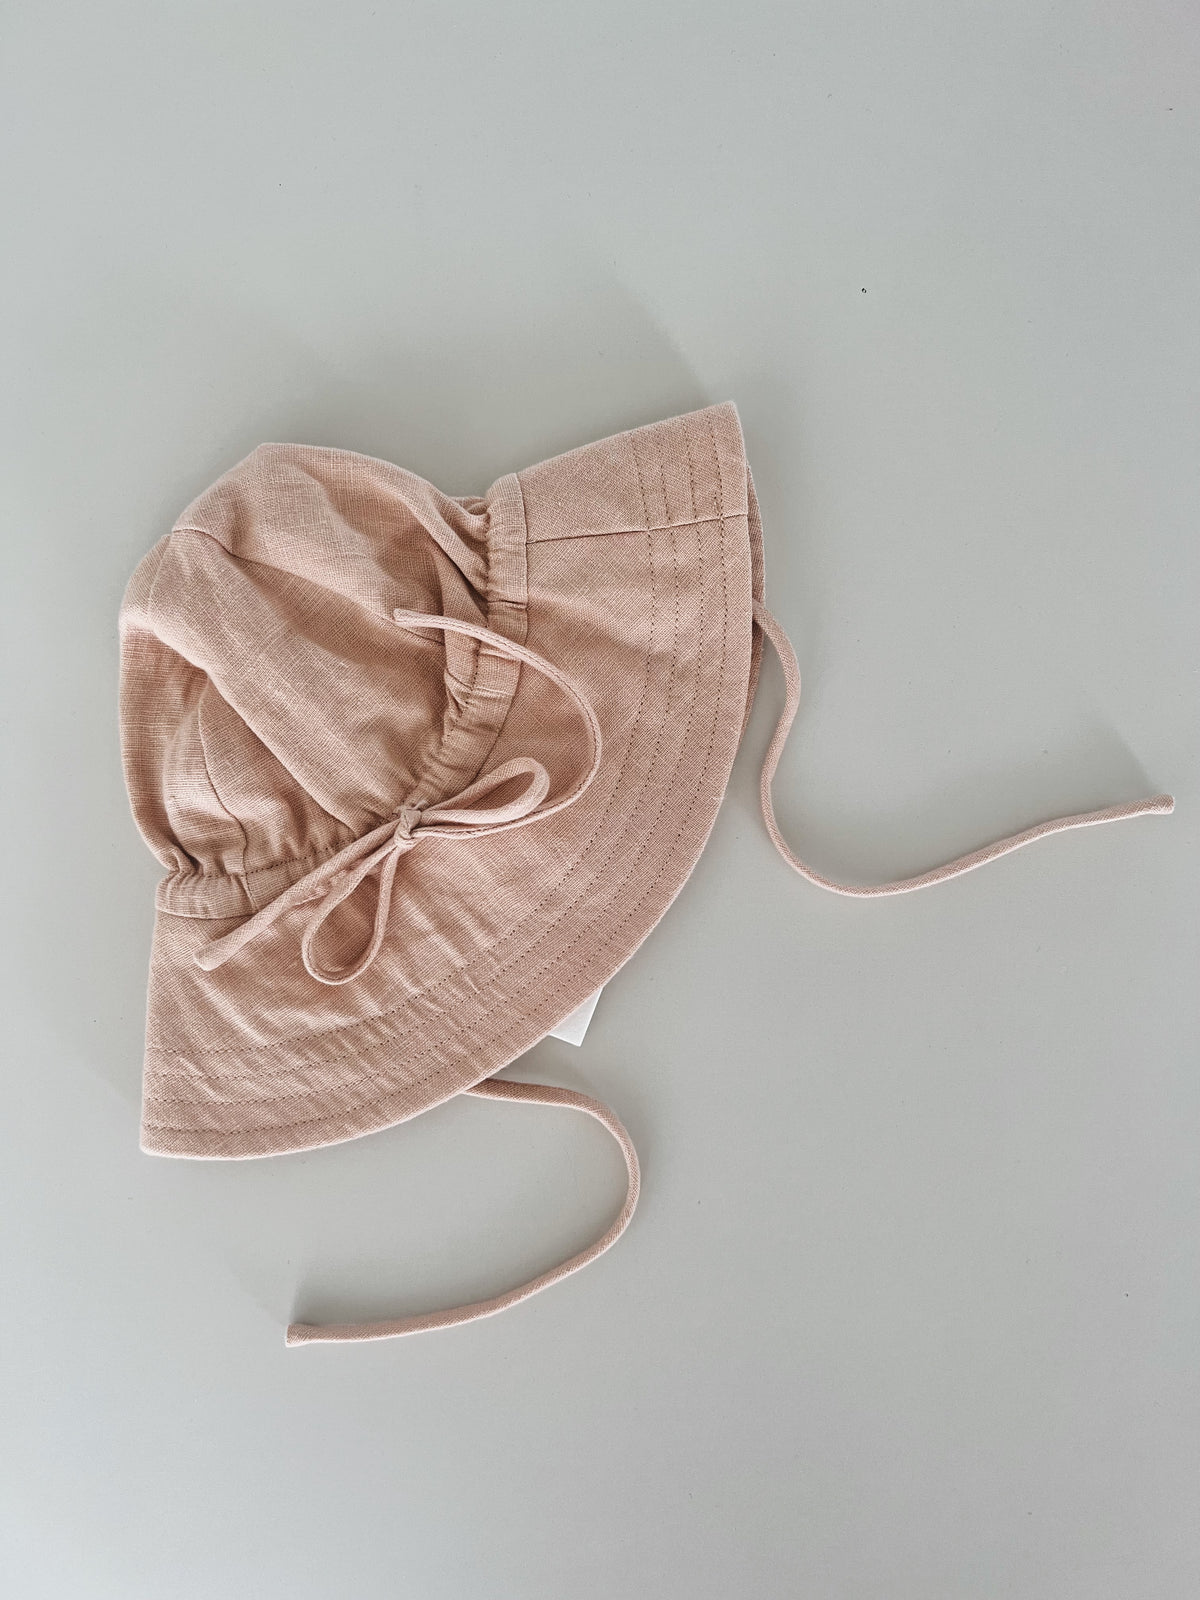 Baby hat (seconds) size 0-3 months/ peach